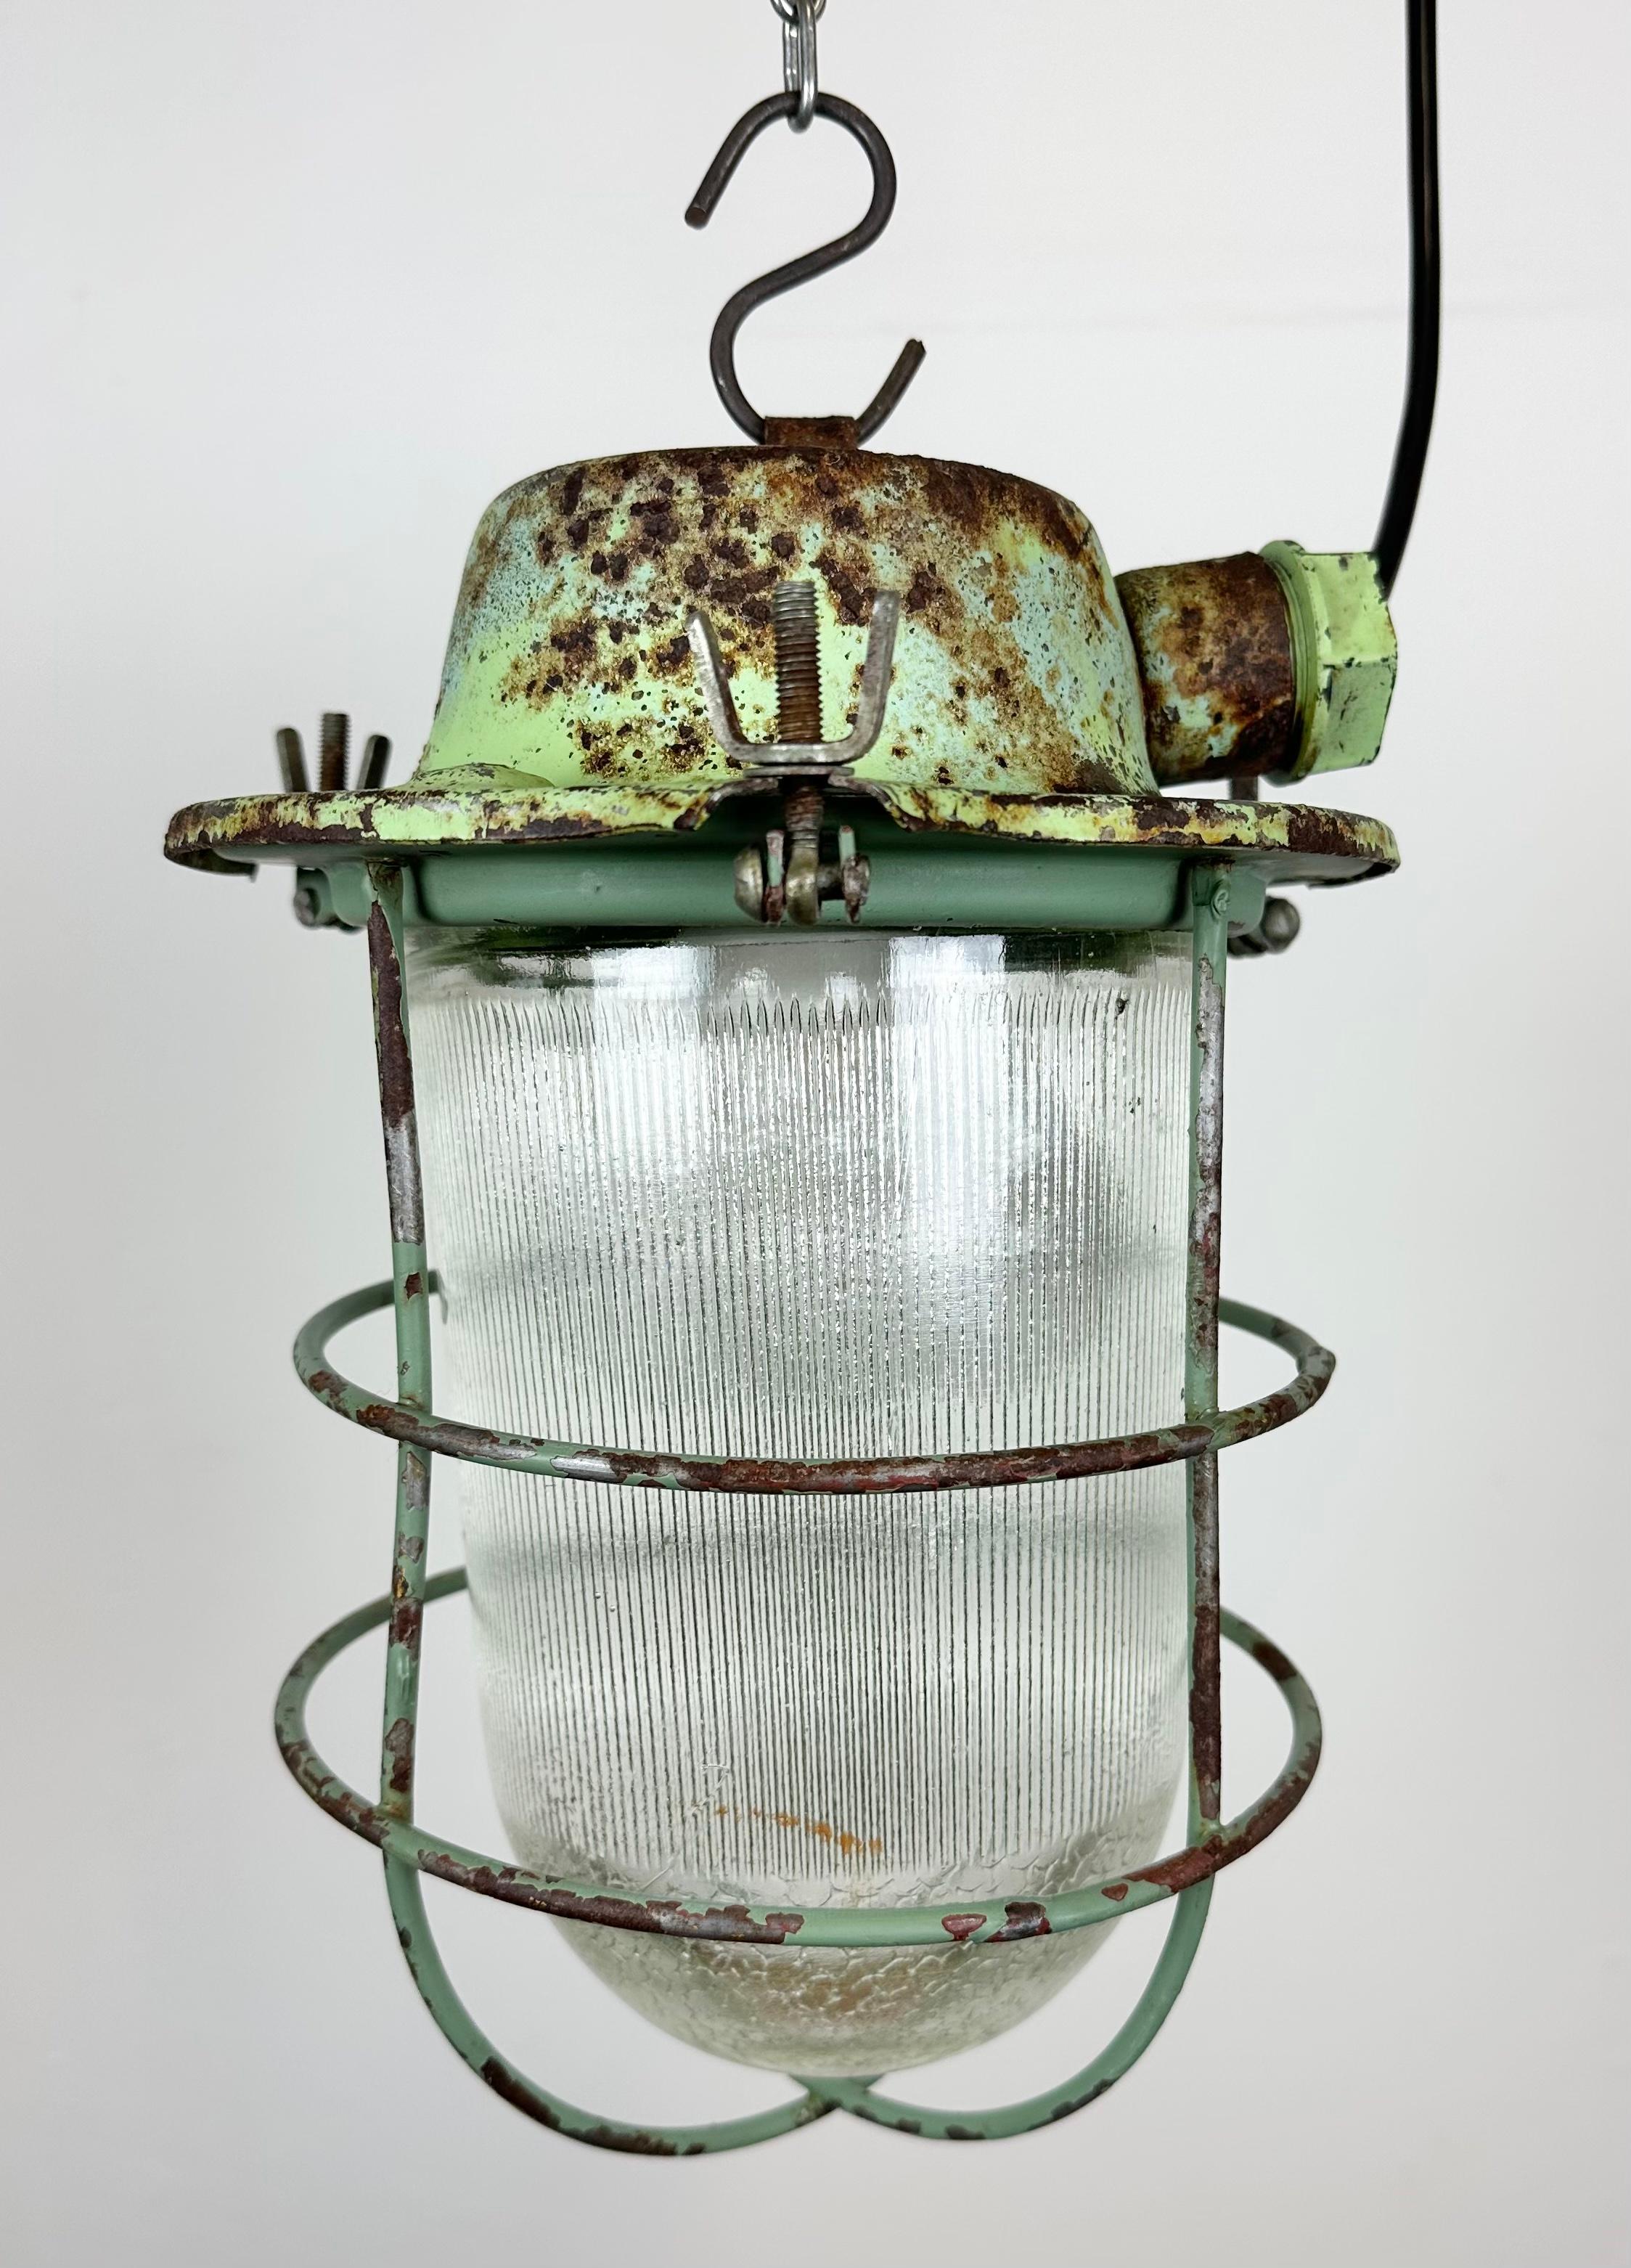 Russian Green Industrial Soviet Bunker Pendant Light with Iron Grid, 1960s